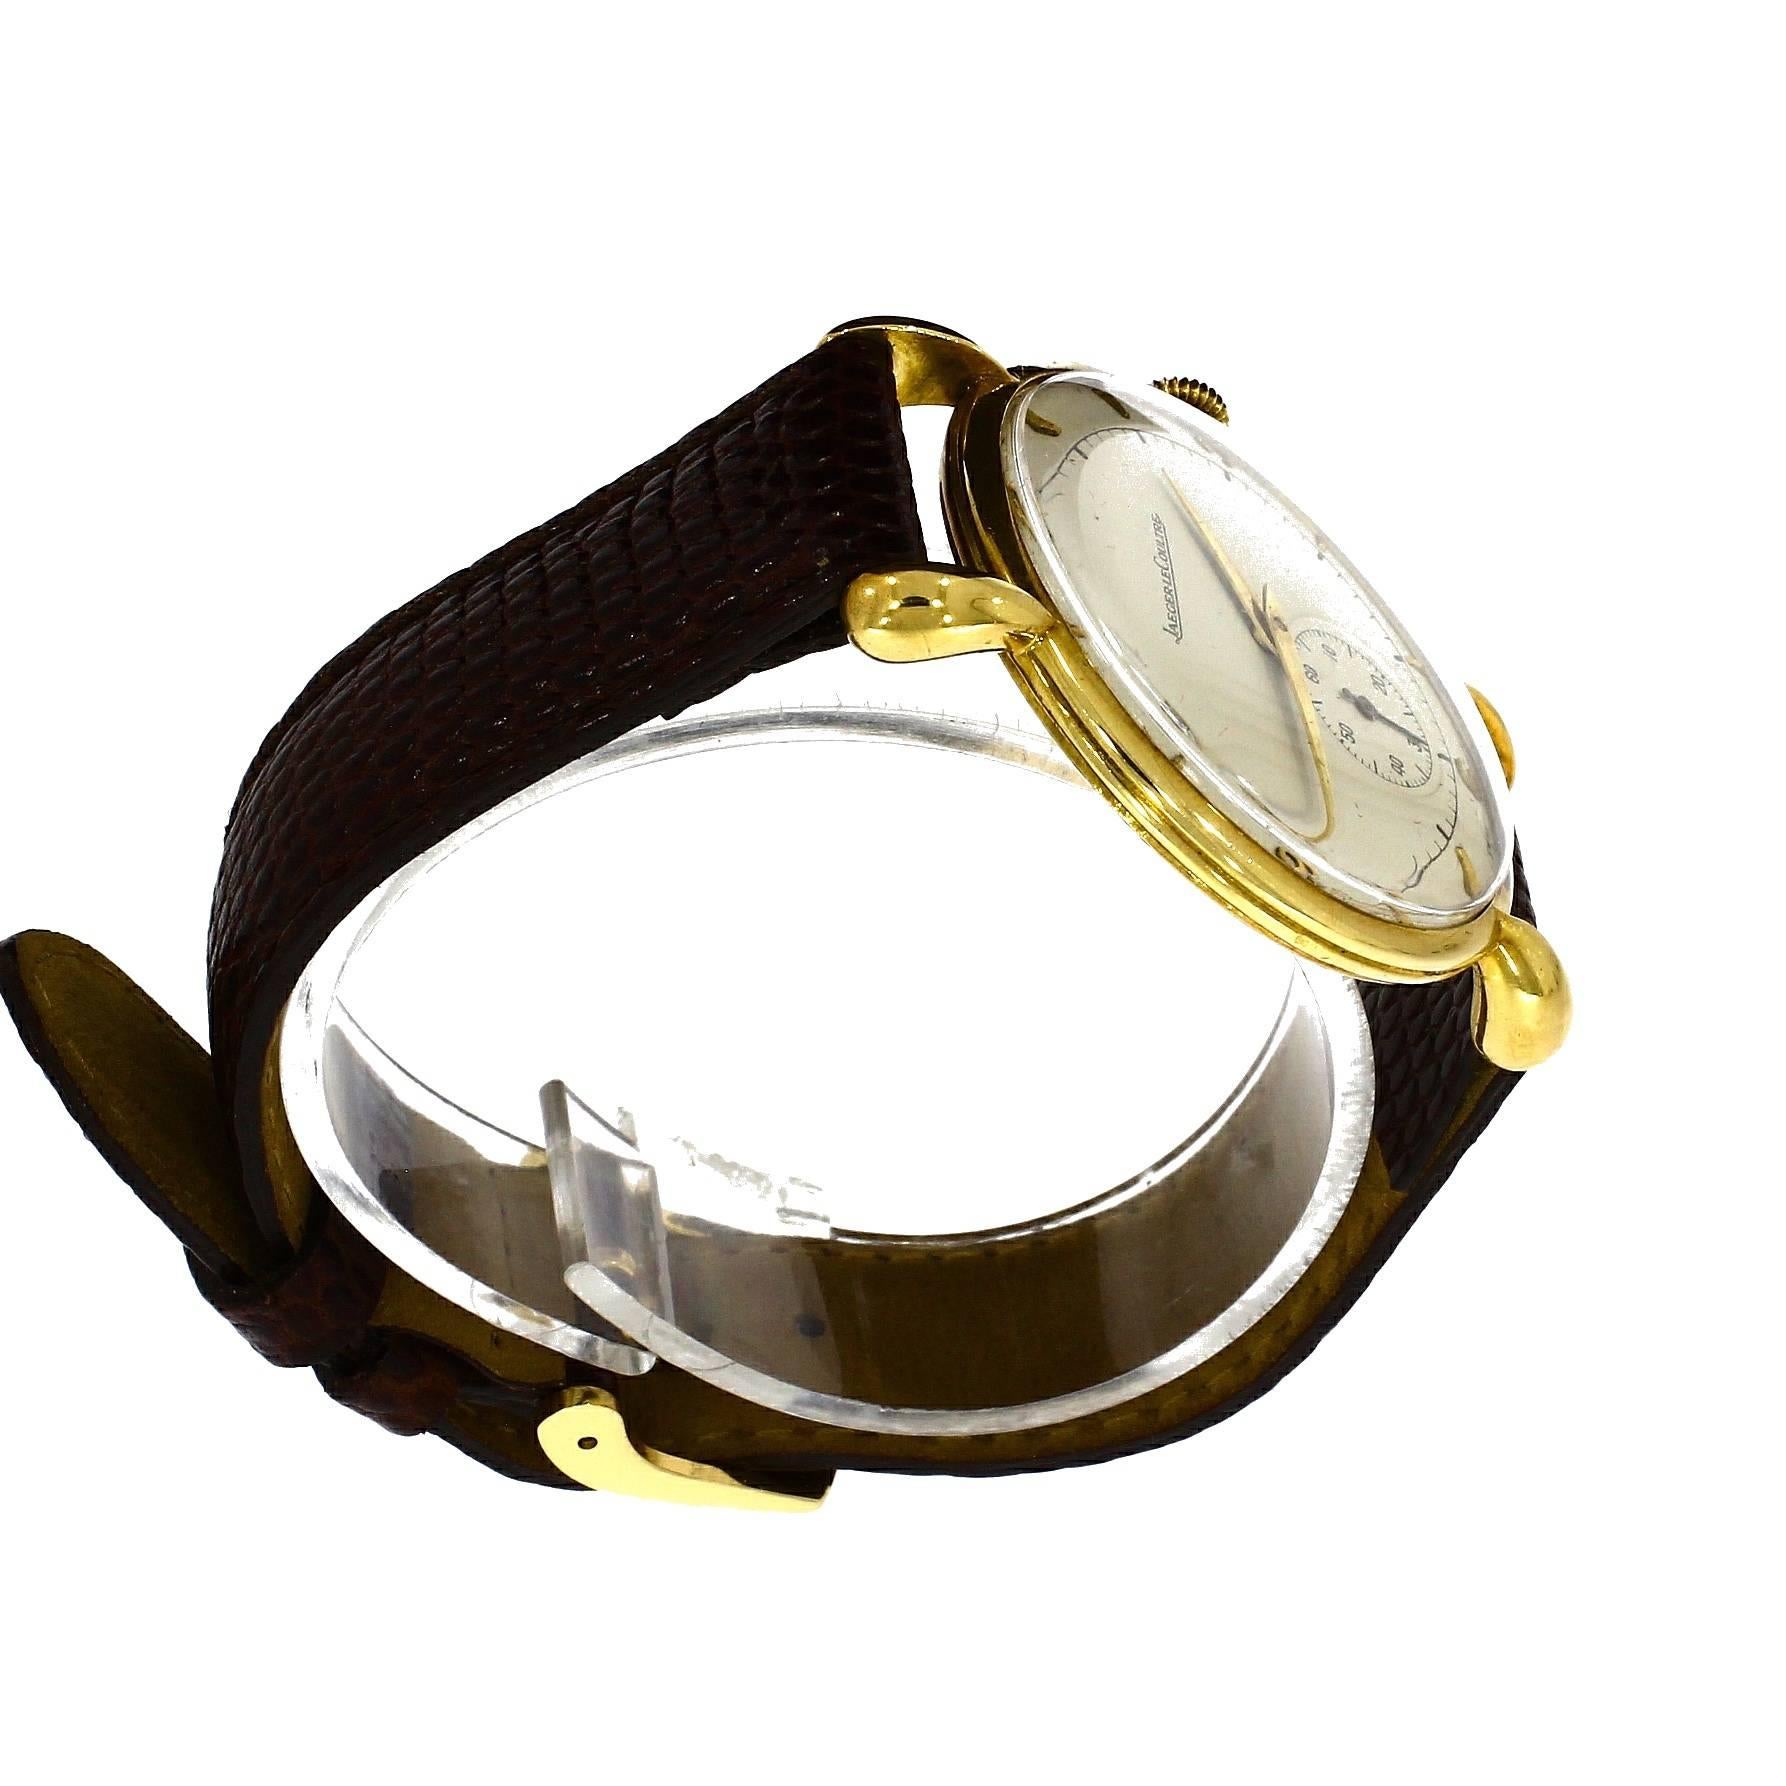 Jaeger LeCoultre Yellow Gold Case 584516 Watch For Sale 3